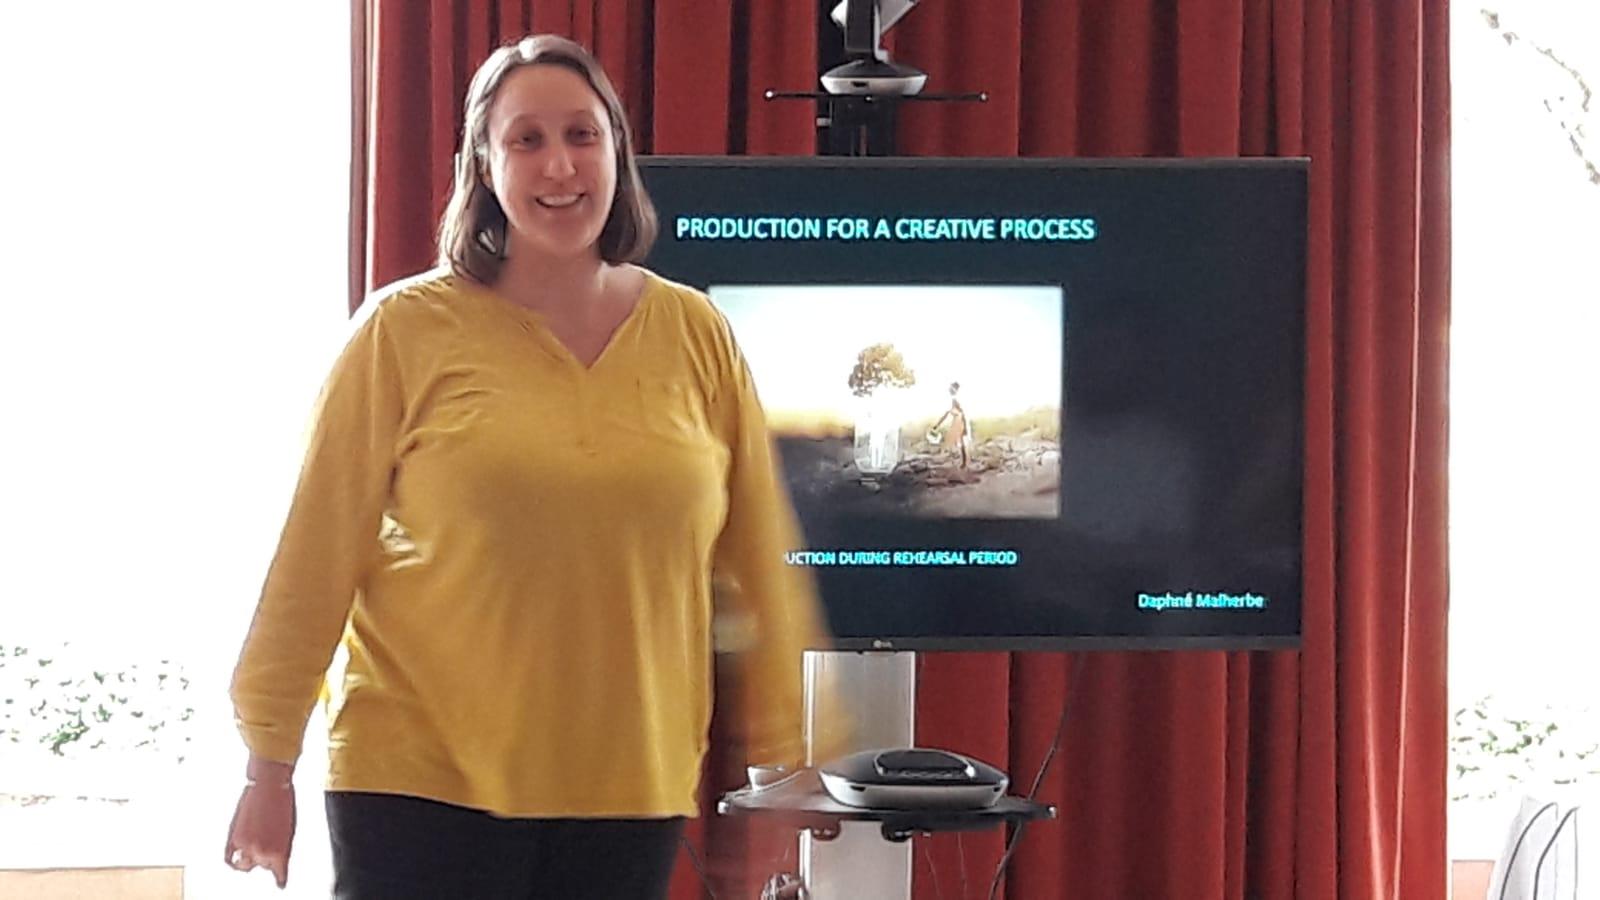 Production of creative processes, by Daphne Malherbe